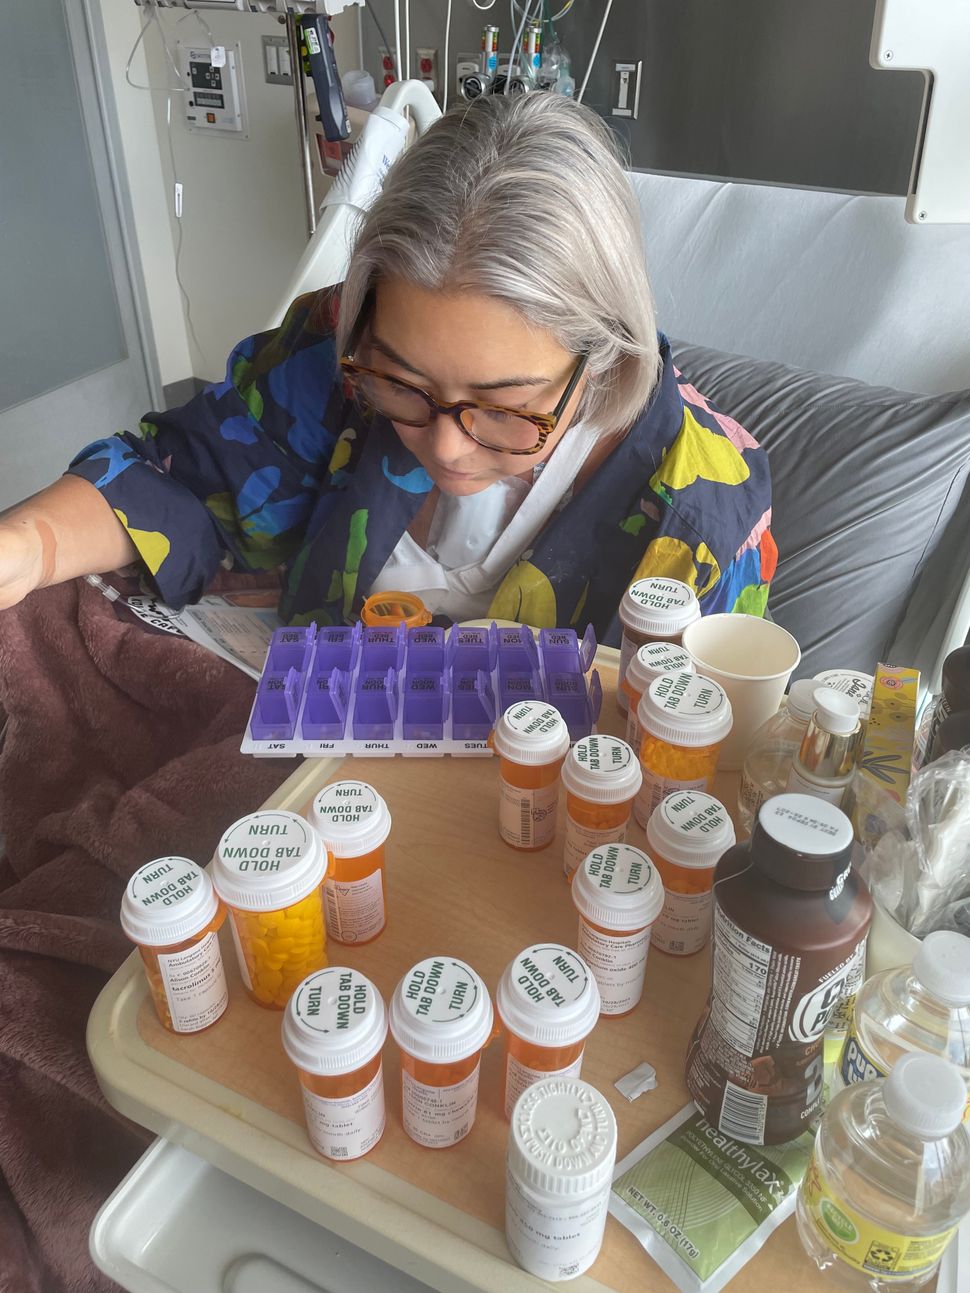 Oct. 28, 2022: I was completely overwhelmed with my new medication routine. The very patient pharmacist sat with me to go over every new prescription, what they did, and the importance of taking each one of the 14 new medications.